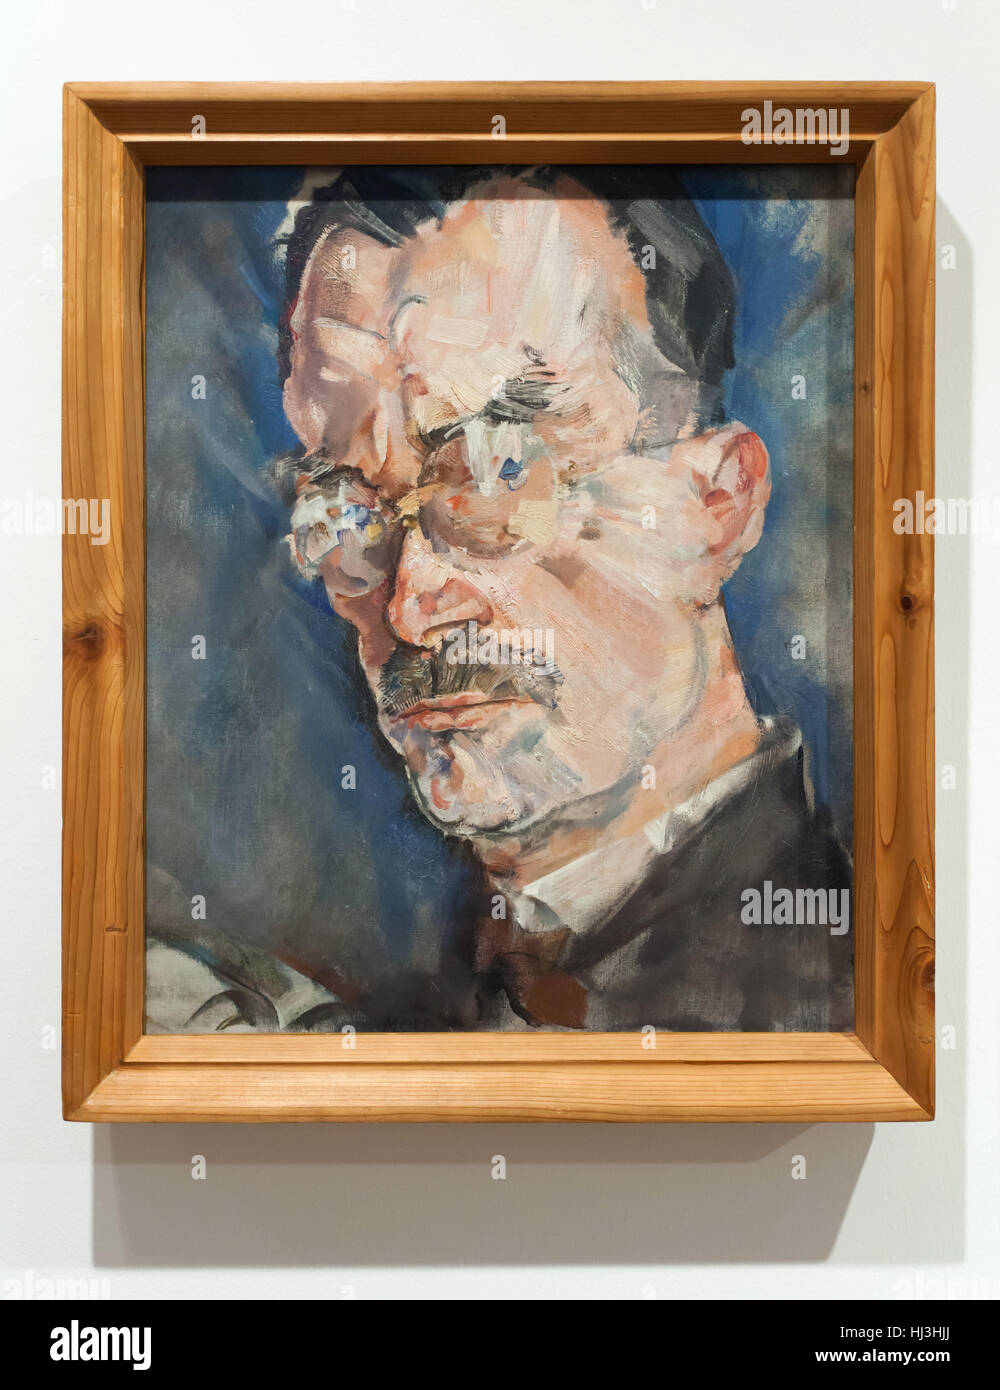 Portrait of German novelist Thomas Mann (1926) by Austrian expressionist painter Max Oppenheimer, also known as Mopp on display in the Wien Museum (Vienna Museum) in Vienna, Austria. Stock Photo